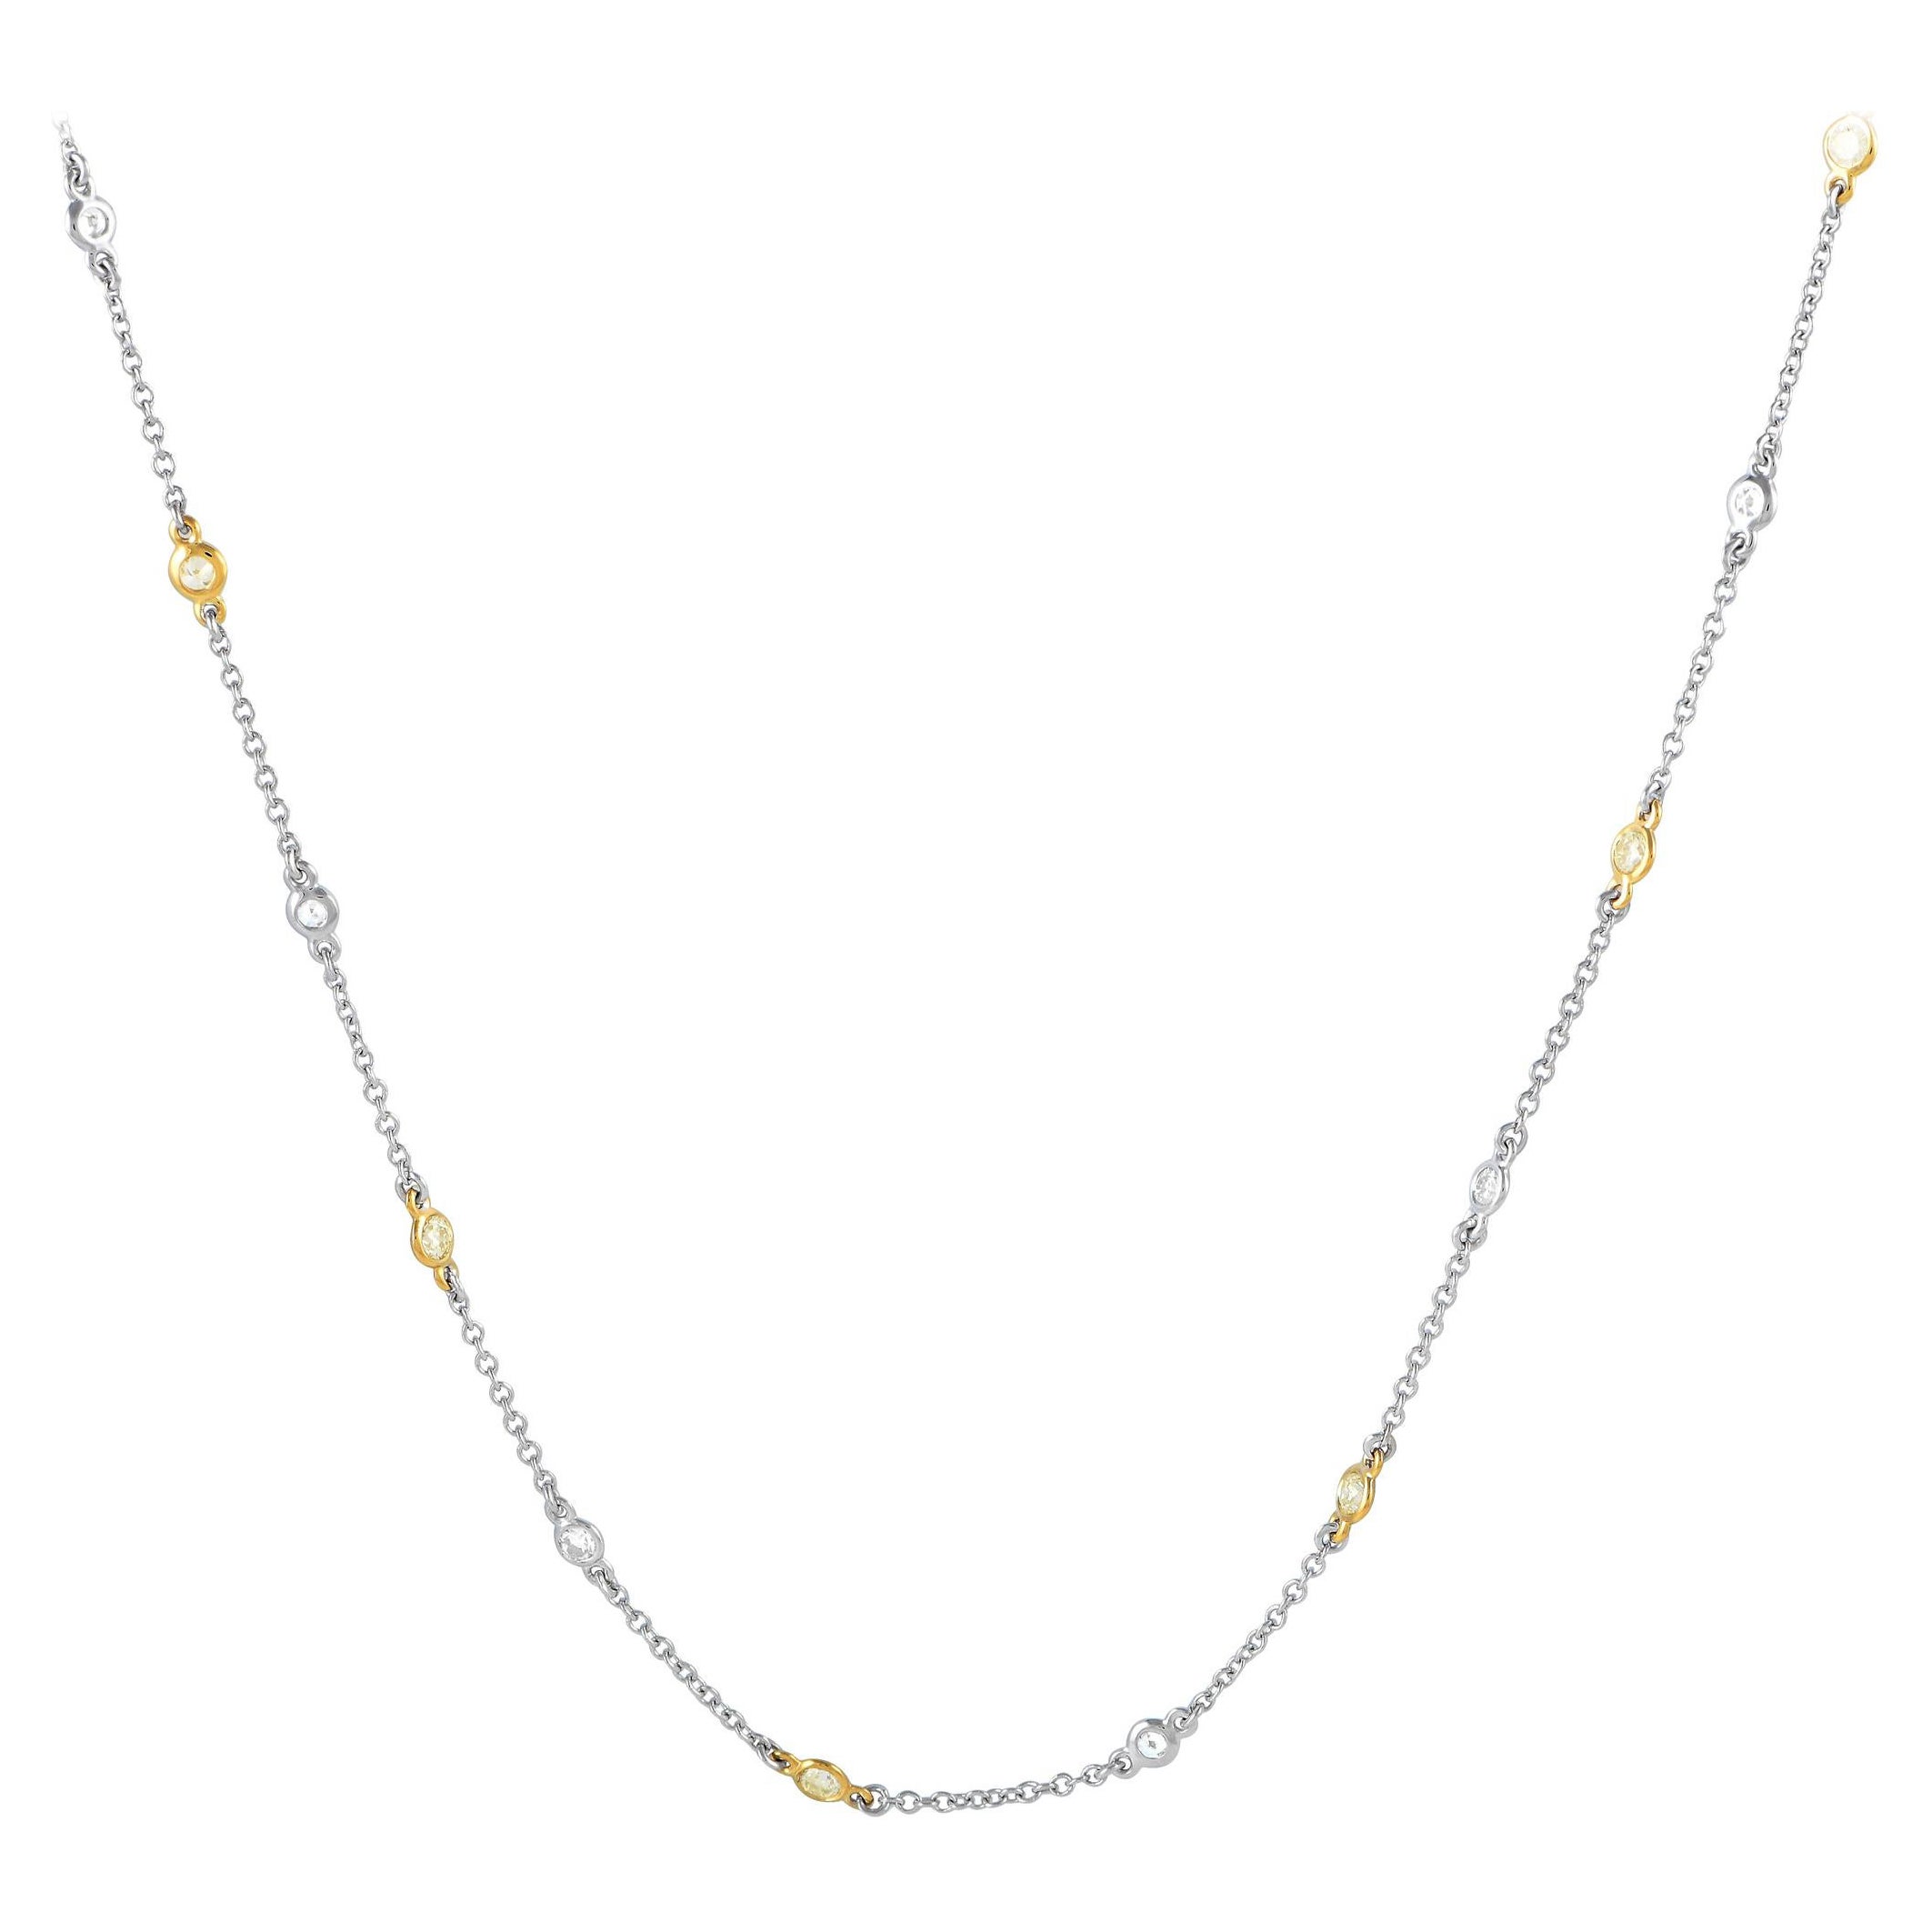 LB Exclusive 18K White and Yellow Gold 1.08ct Diamond Station Necklace